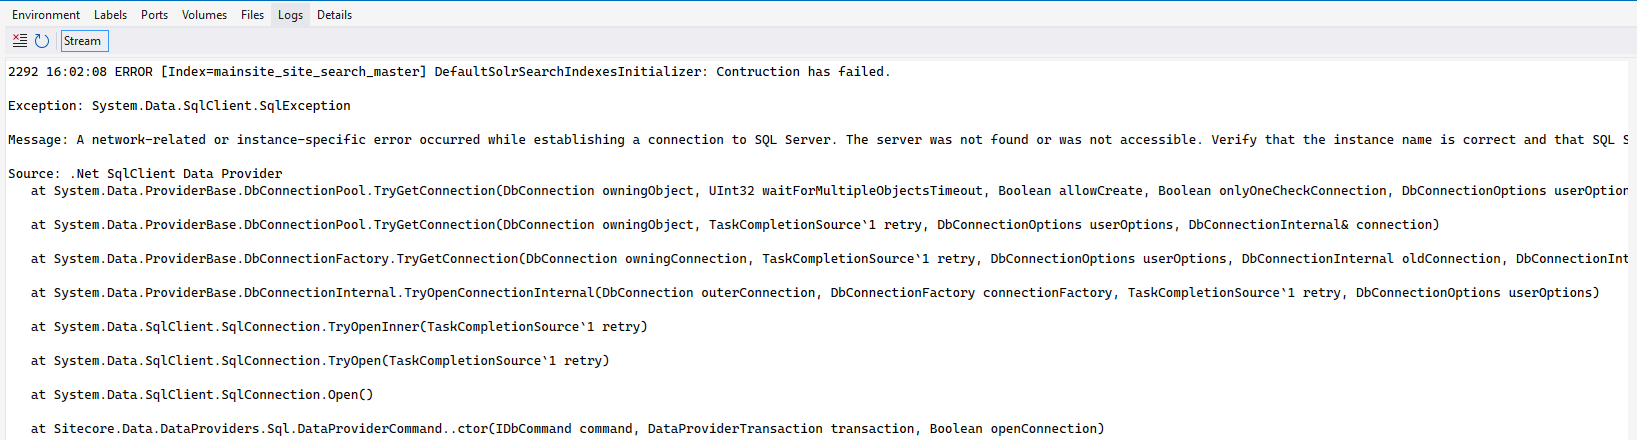 Log errors from SQL connections